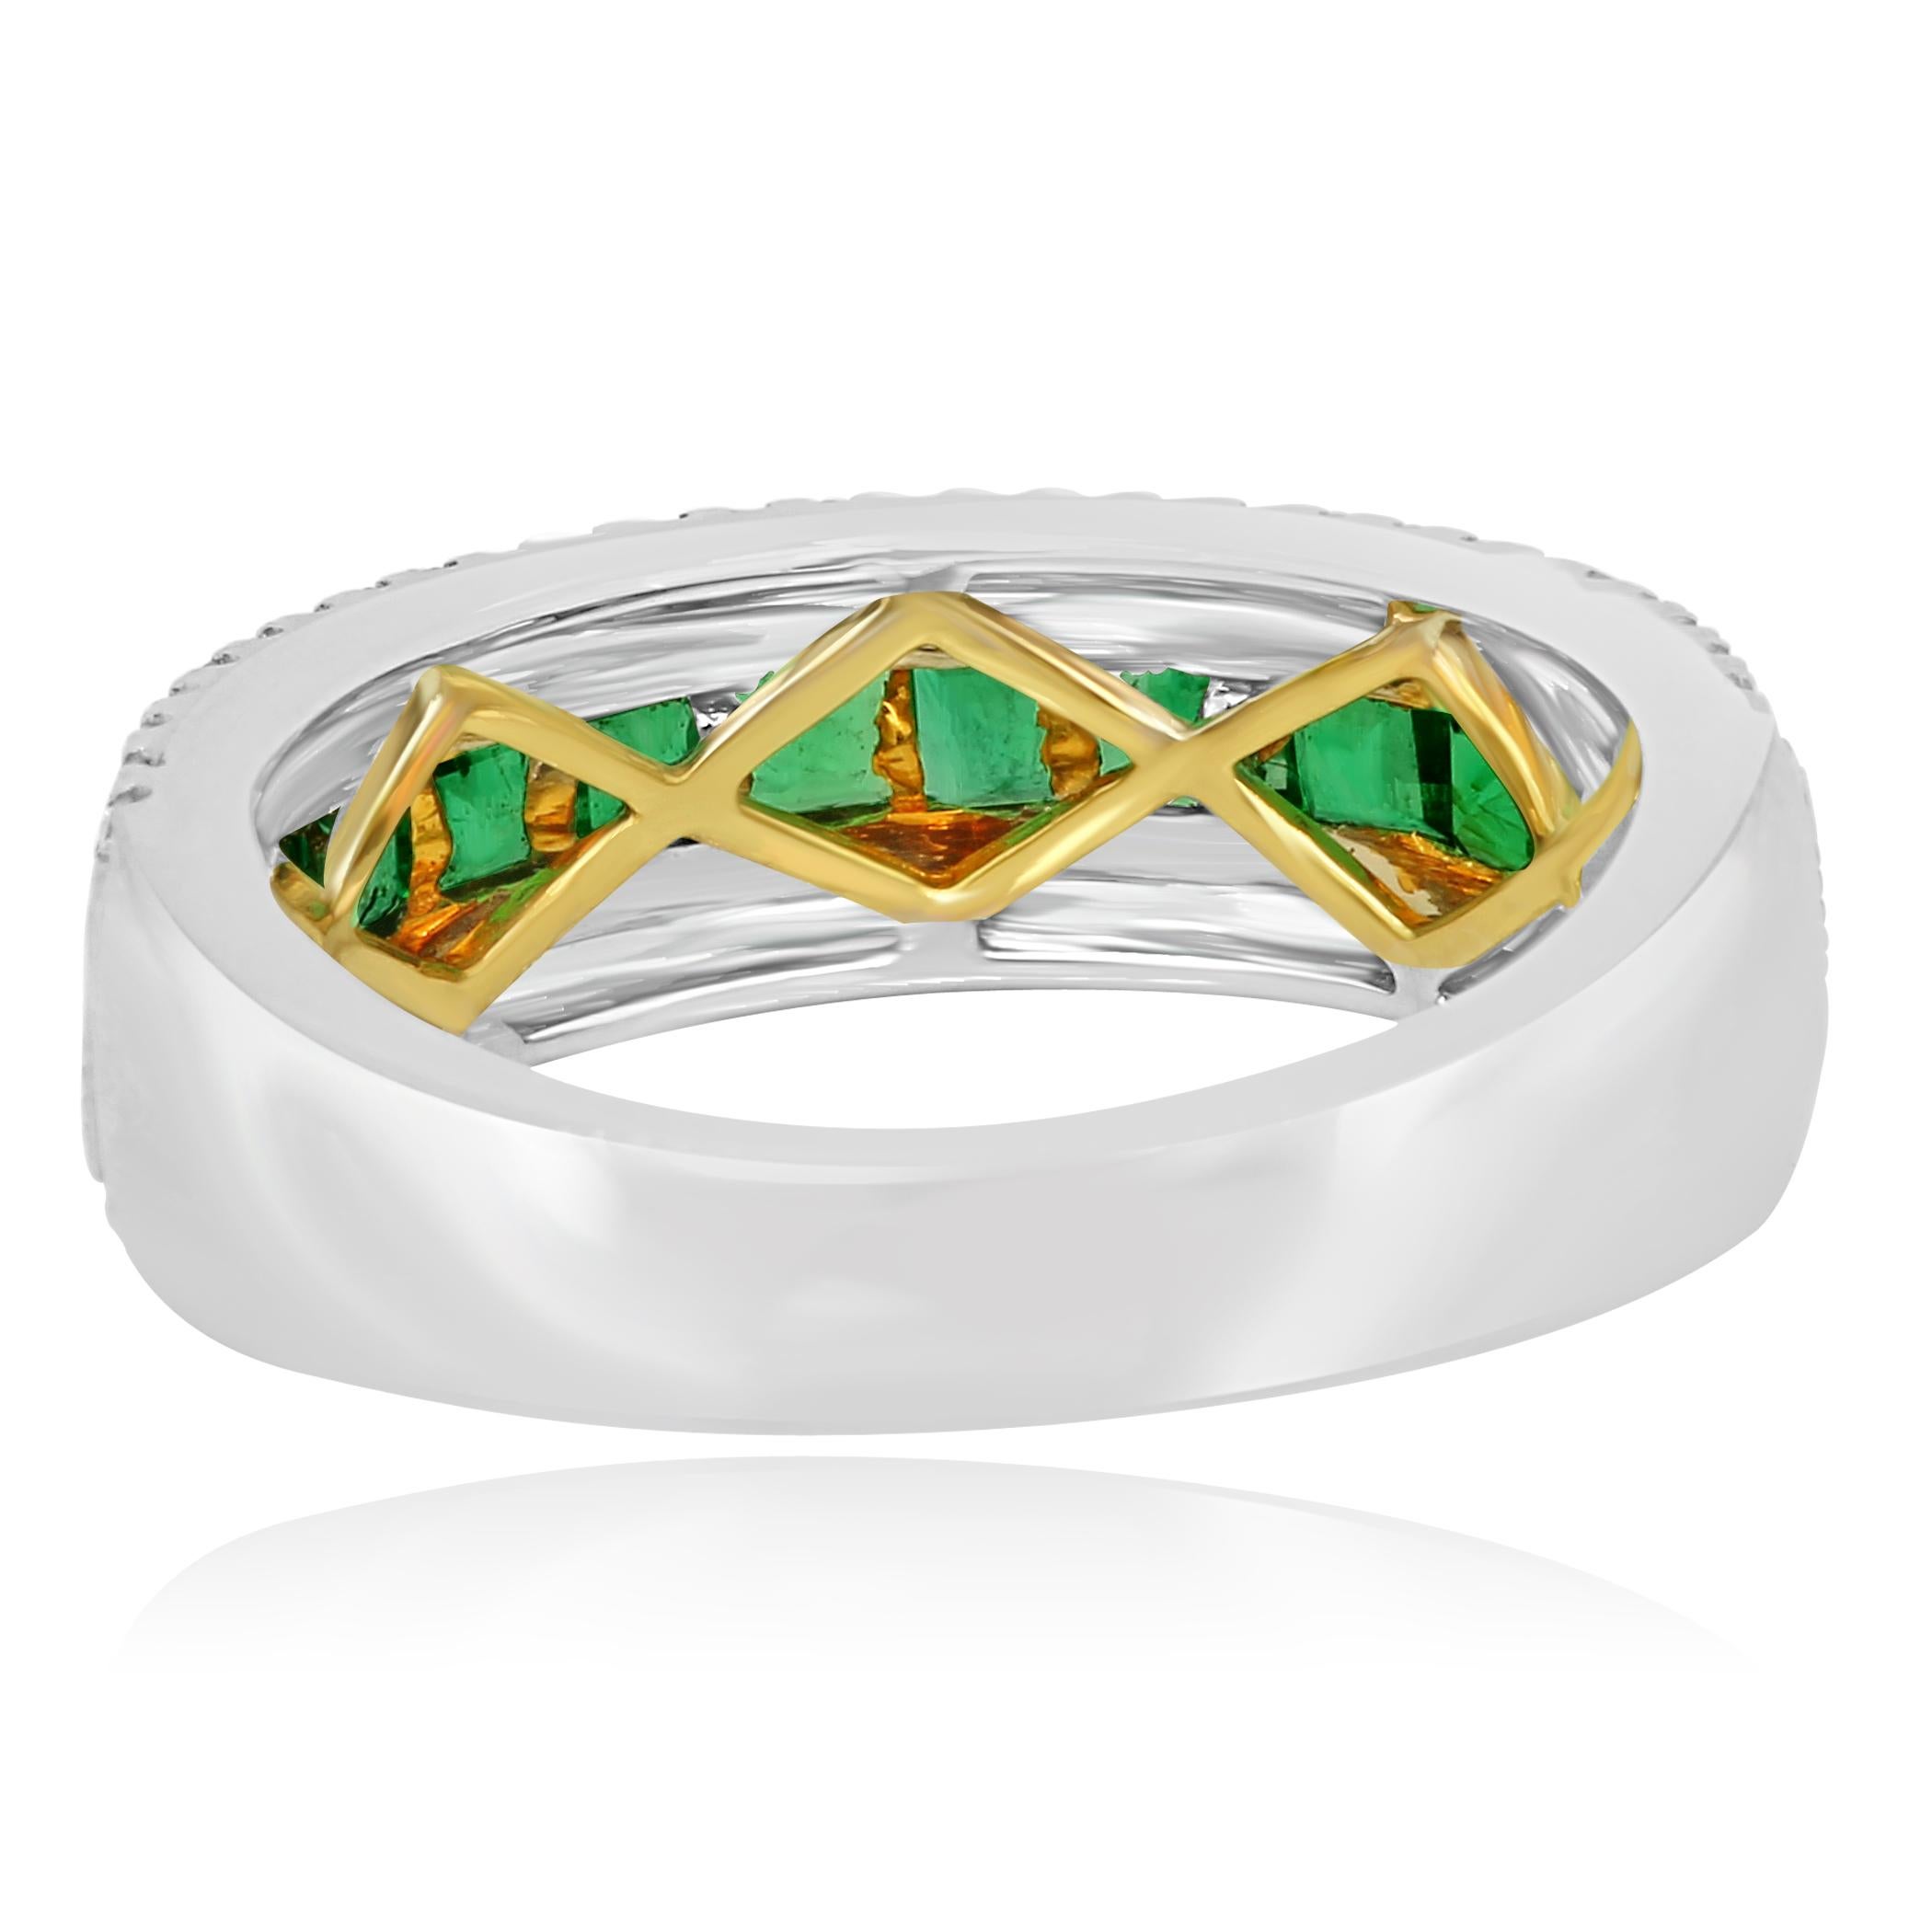 Women's or Men's Emerald Diamond Three-Row Channel Set Two-Color Gold Fashion Cocktail Band Ring